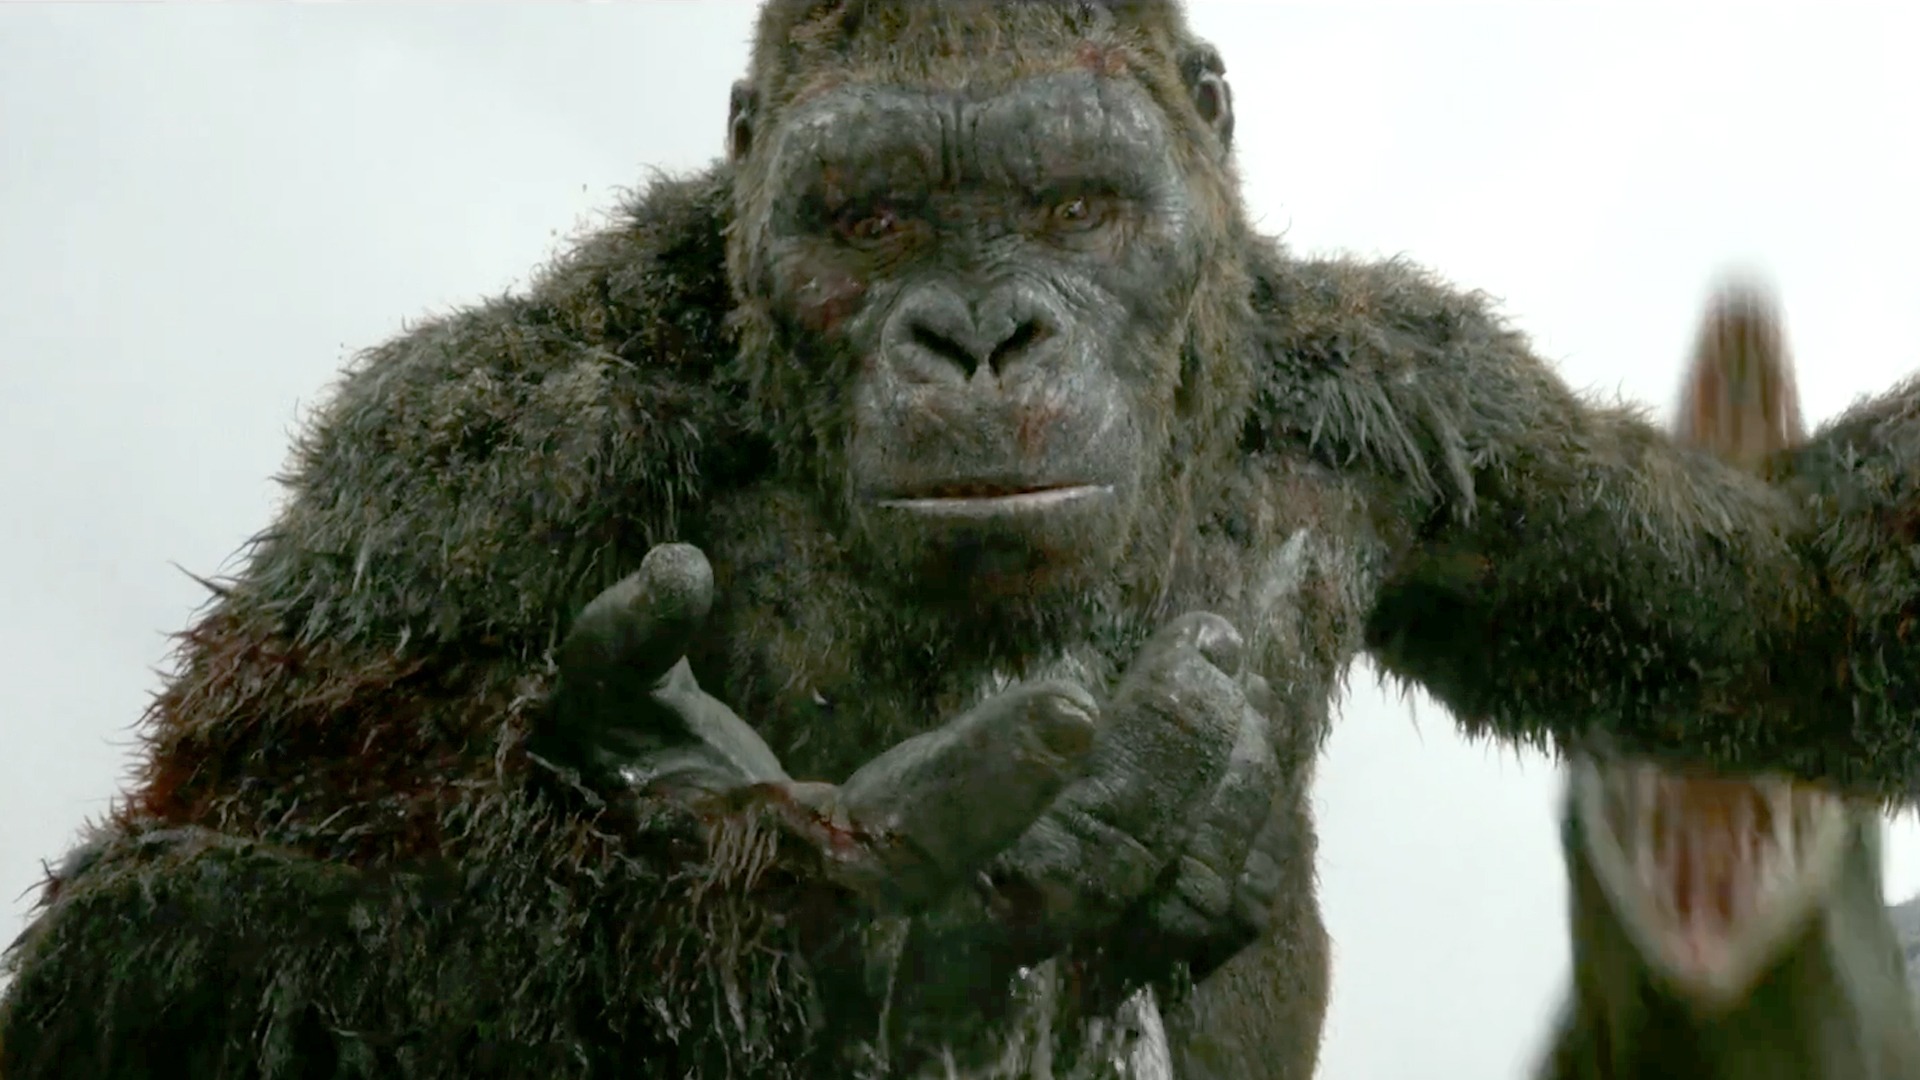 Kong: Skull Island Review. An enjoyable film… if you are an ape